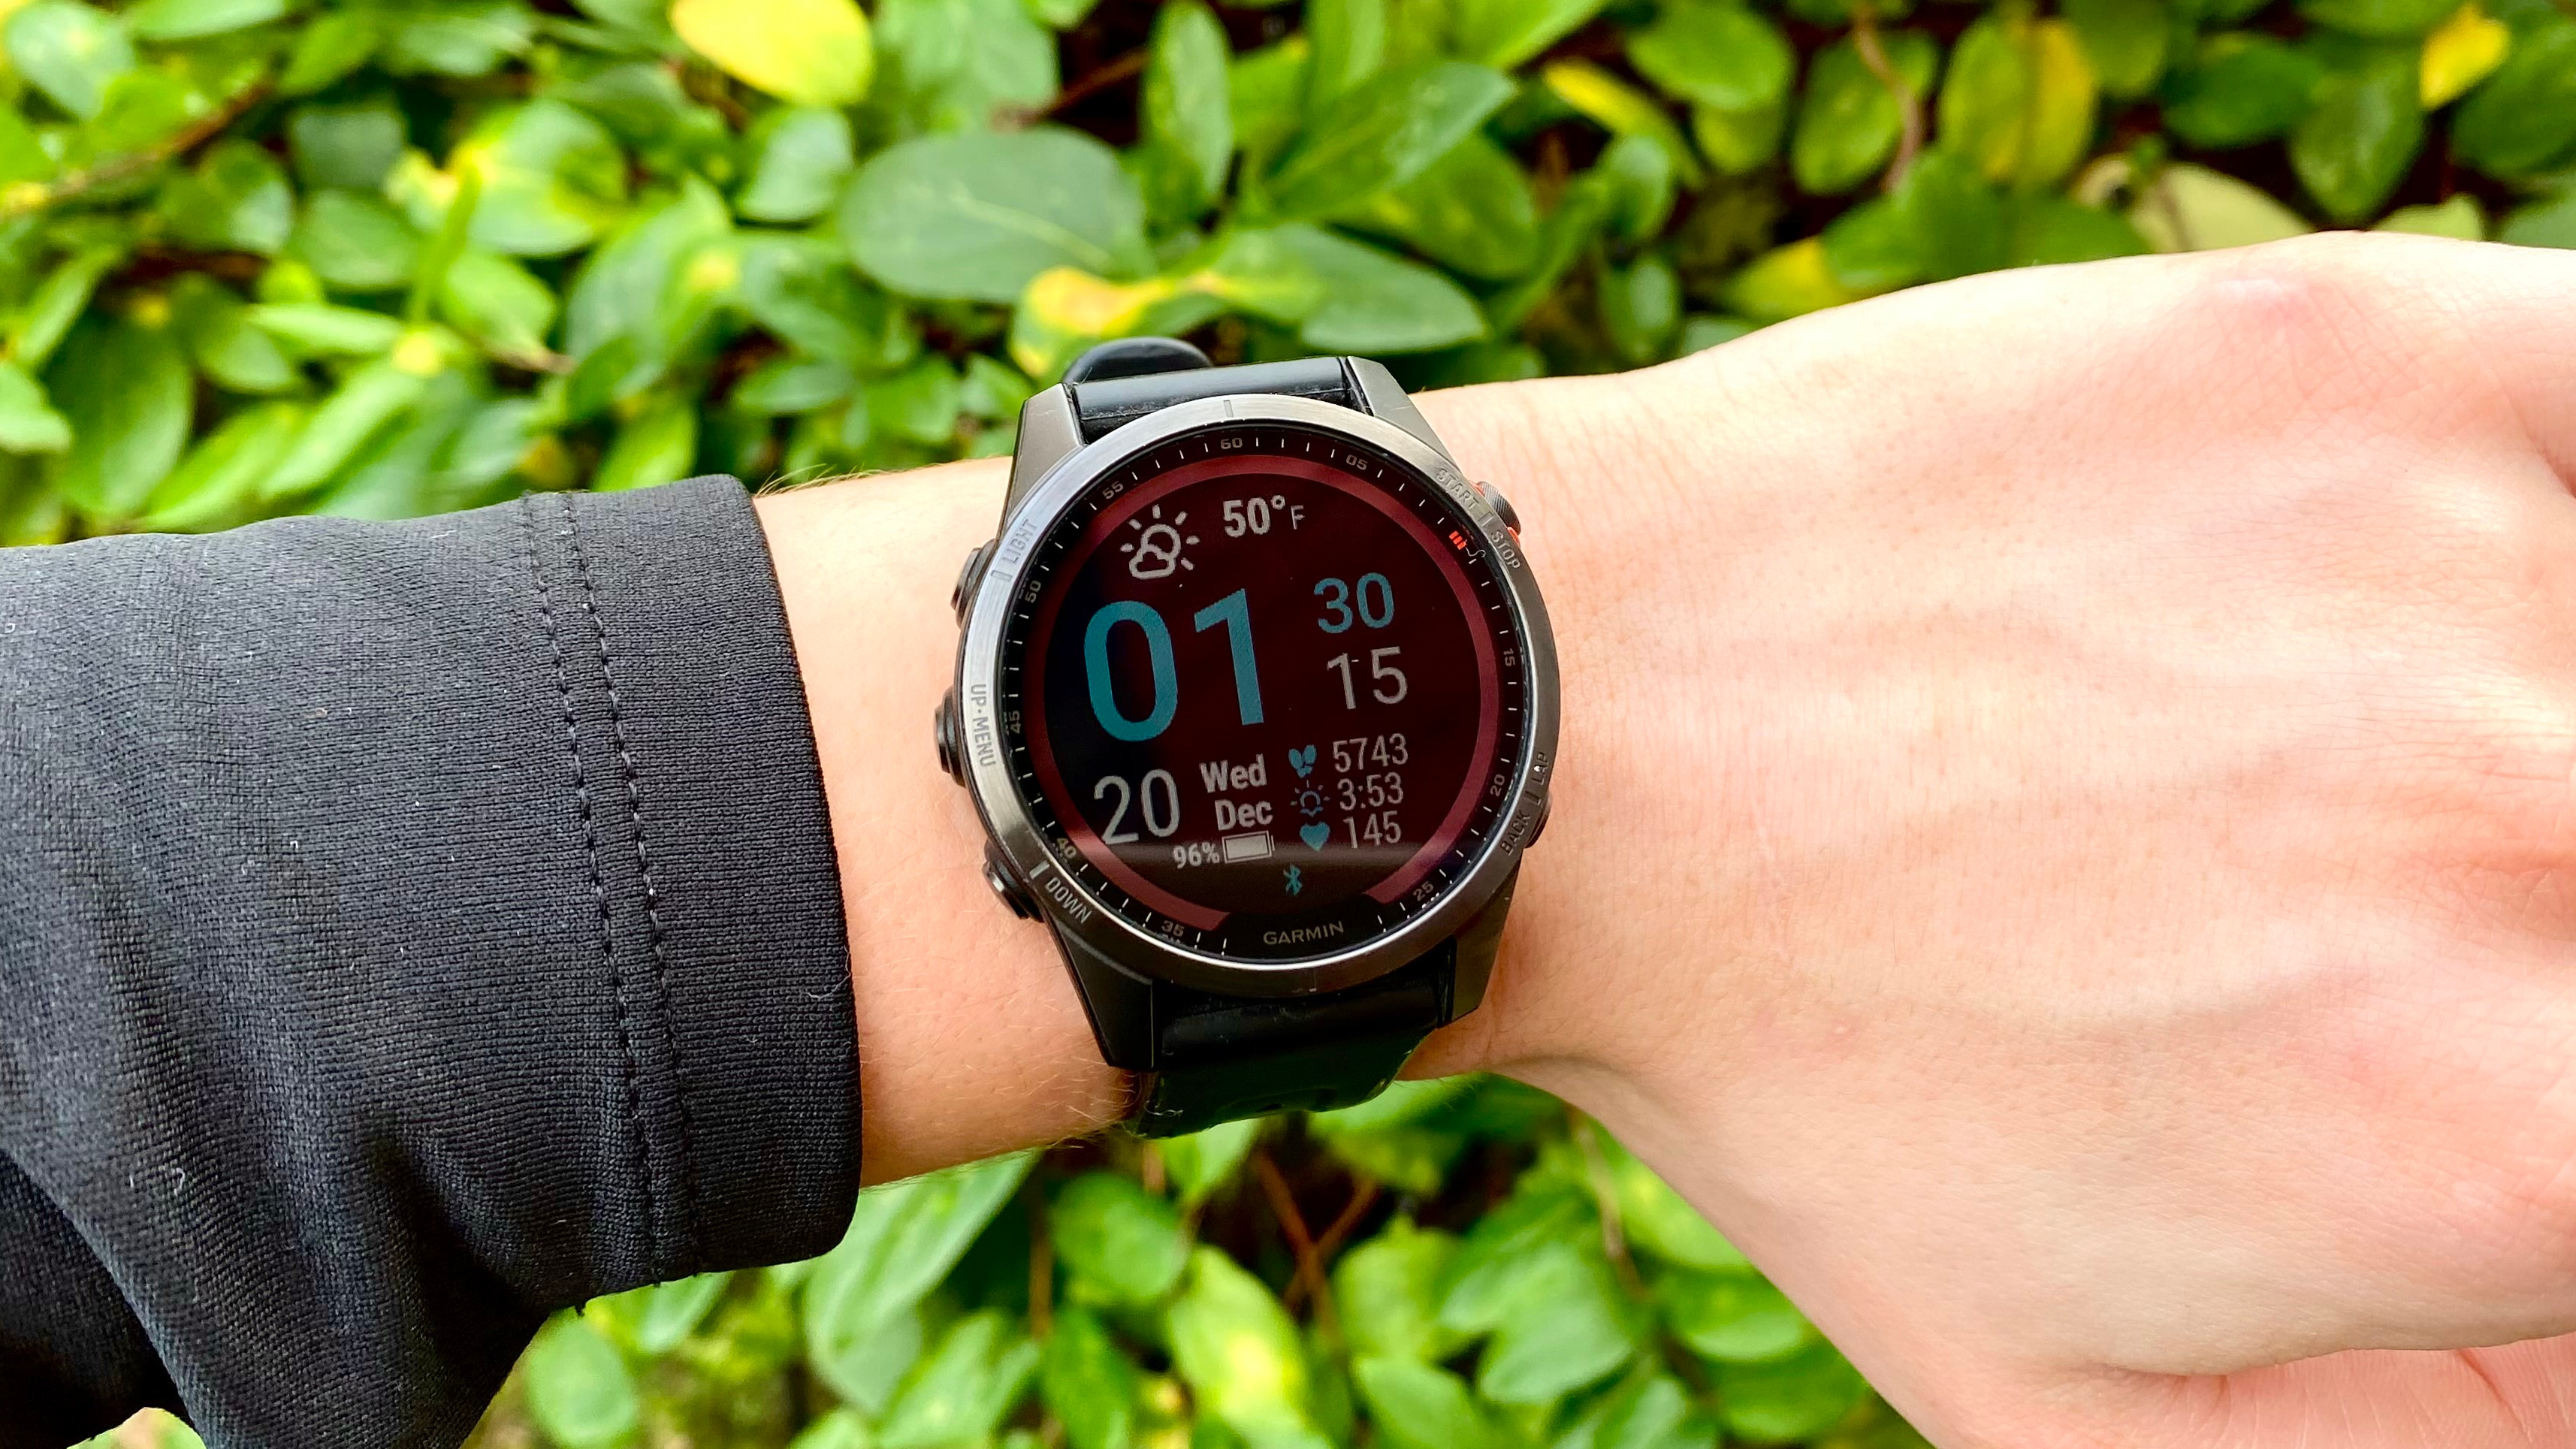 Here's Everything You Need to Know About the GARMIN FENIX 7